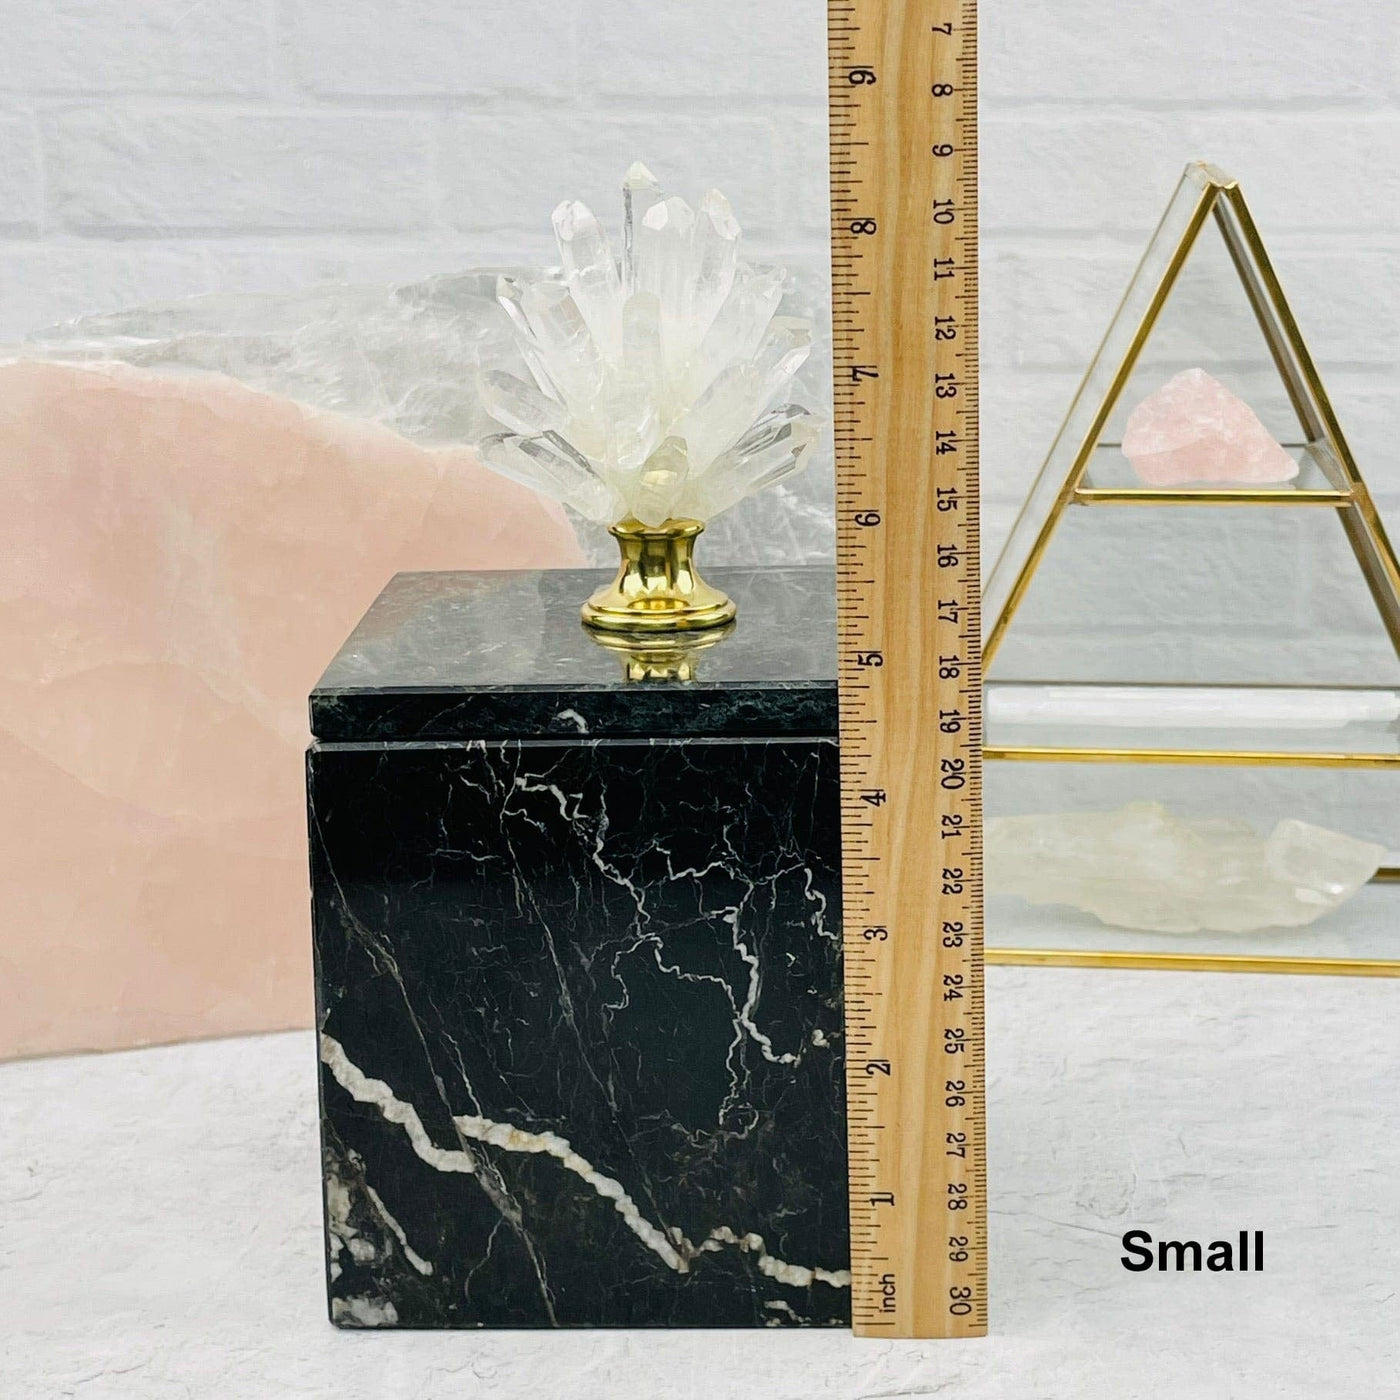 small crystal point pinecone on marble box next to a ruler for size reference